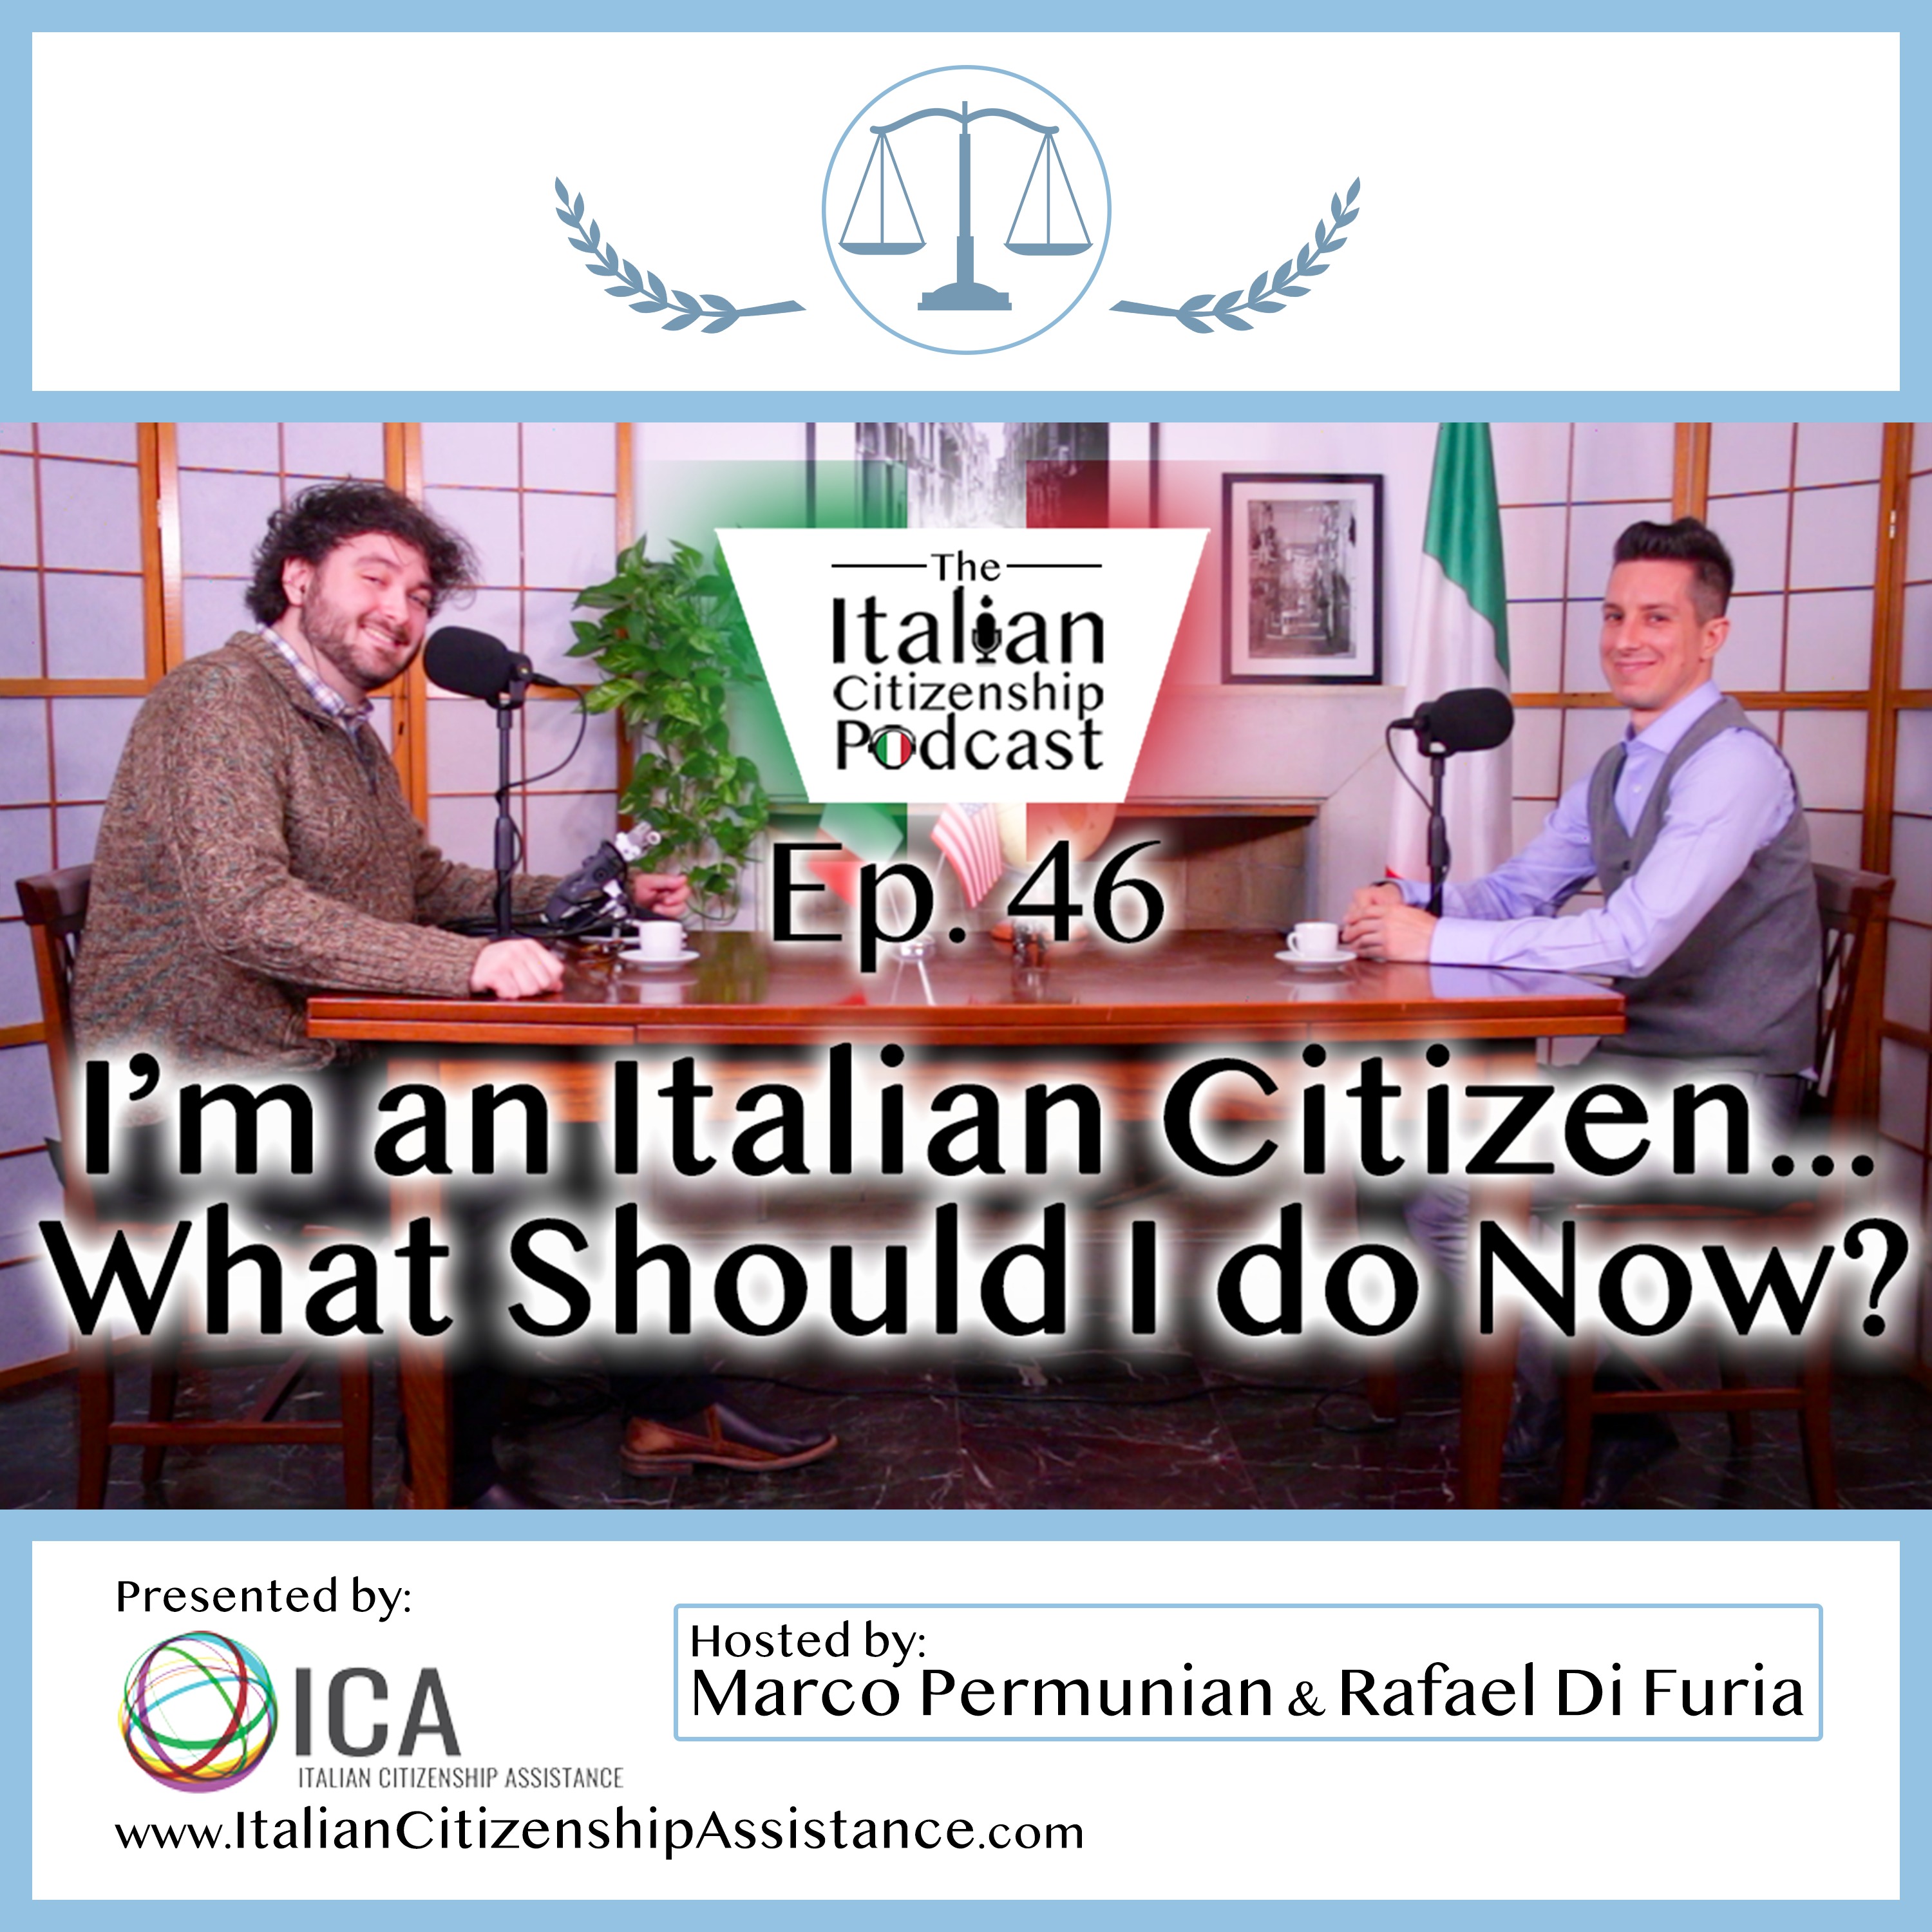 What do I need to do after getting Italian Citizenship by descent? (Jure Sanguinis)